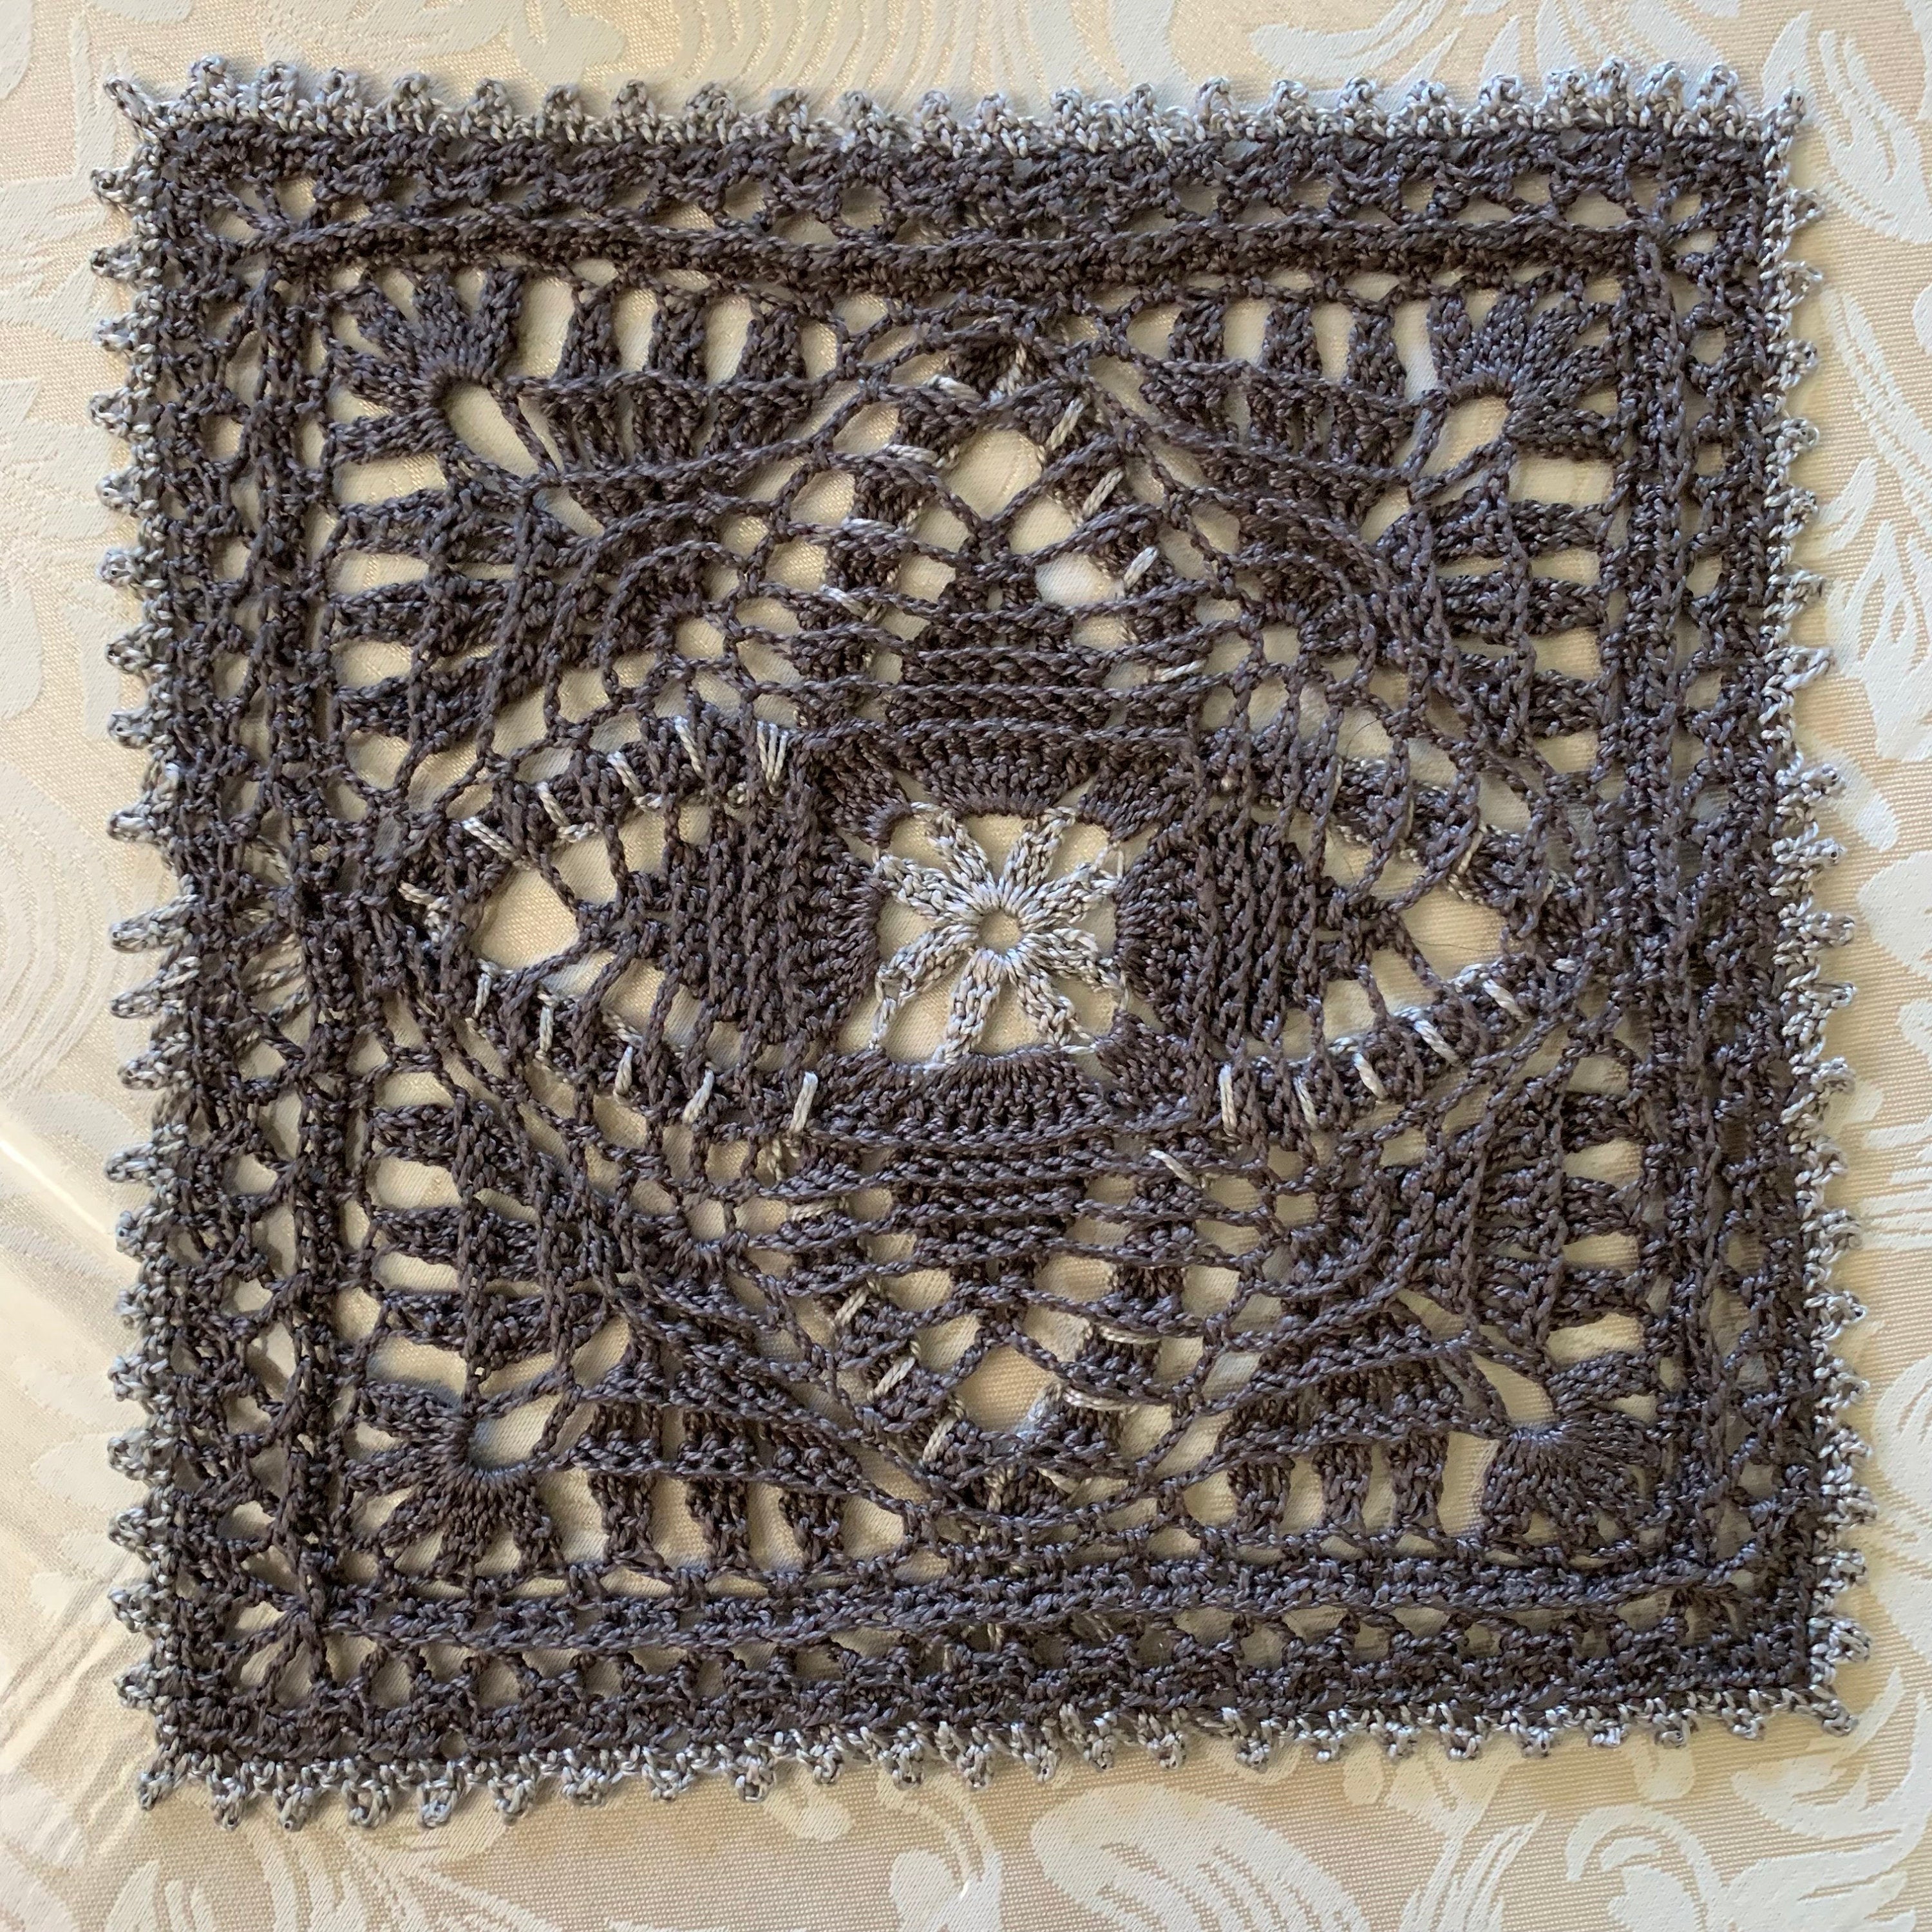 8” Square Crochet Doily- Charcoal Gray with Light Gray Accents